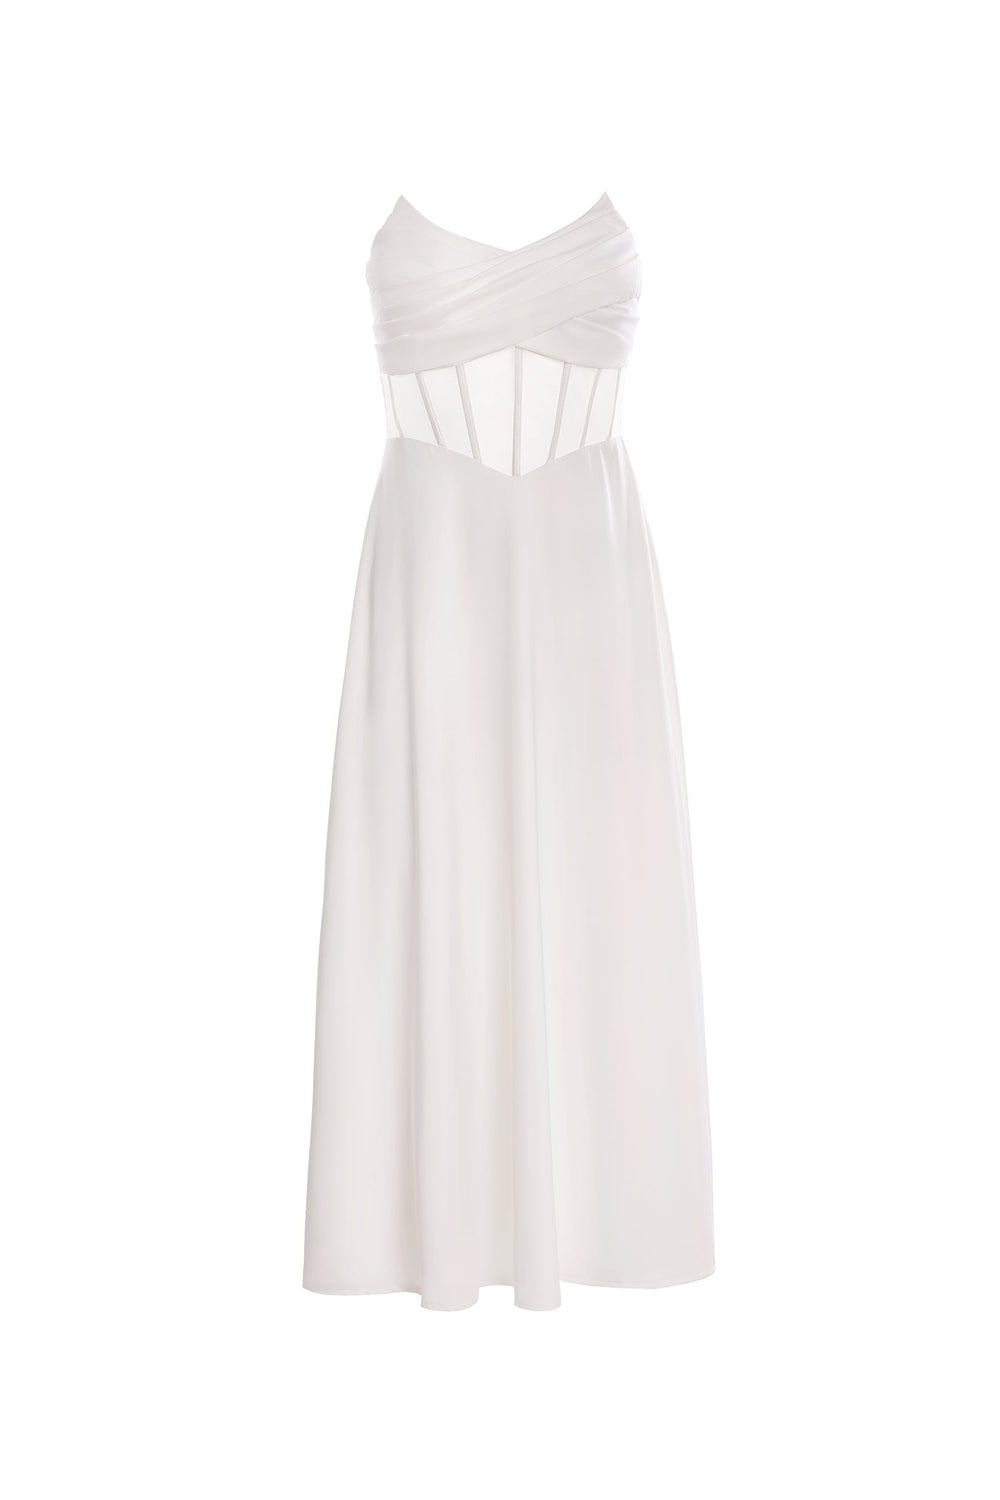 Rosanna - White Satin Dress with Sheer Boned Bodice and A-Line Skirt